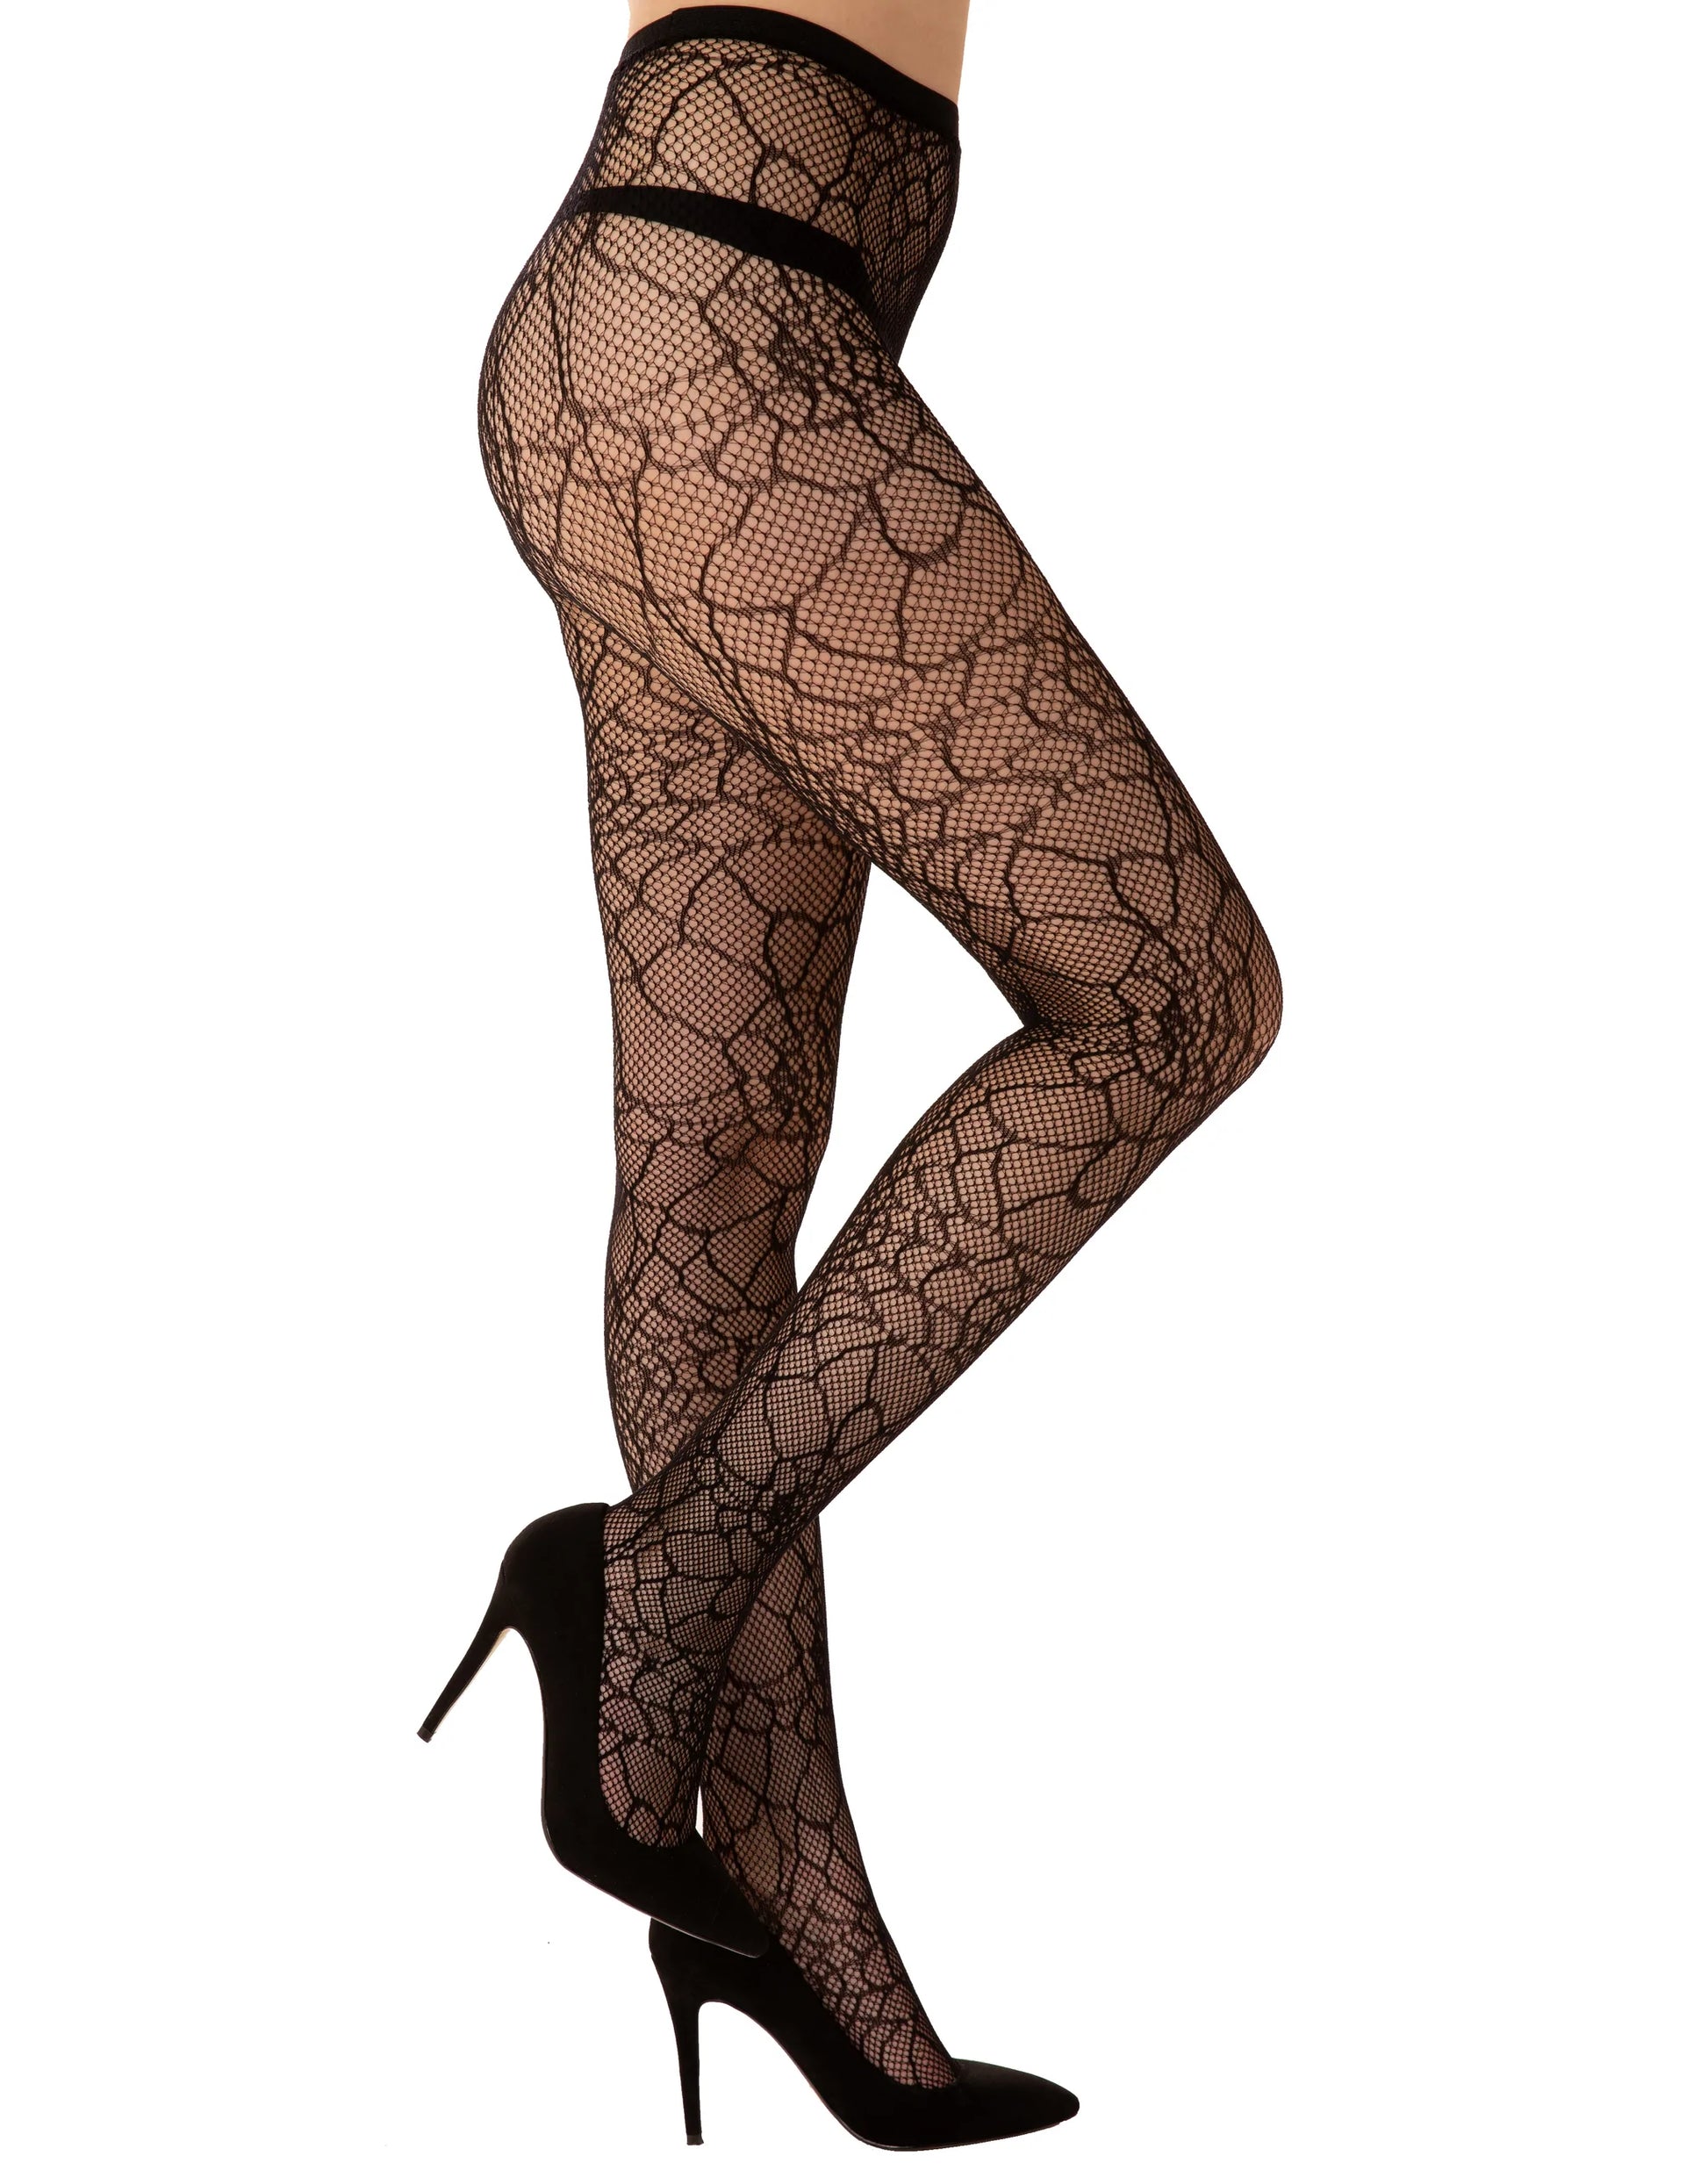 Pamela Mann Cobweb Fishnet Tights - Black openwork fishnet tights with an all over woven spider web style pattern, perfect for Halloween.